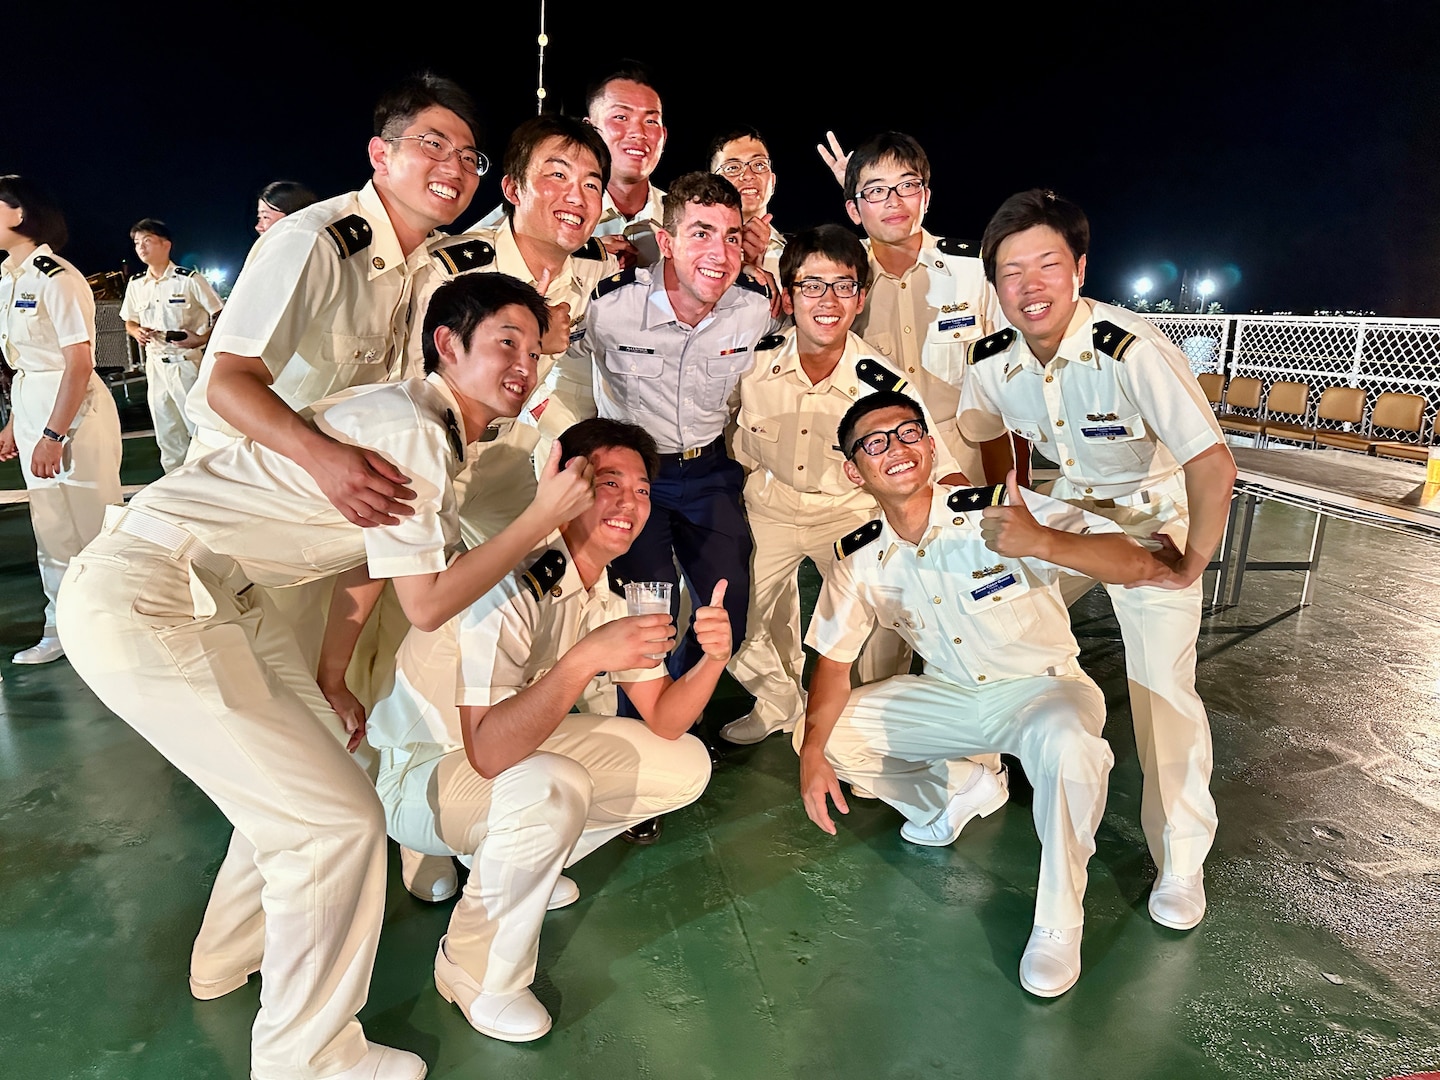 U.S. Coast Guard Cadet Allentuck takes a moment for a photo with cadets aboard the Japanese Coast Guard training ship Kojima during their visit to Guam on June 12, 2024. During the visit, three U.S. Coast Guard Academy cadets had the unique opportunity to share their recent experience of joining their Japanese counterparts on the voyage to Guam. This journey created lasting memories and built strong professional relationships. (U.S. Coast Guard photo by Chief Warrant Officer Sara Muir)